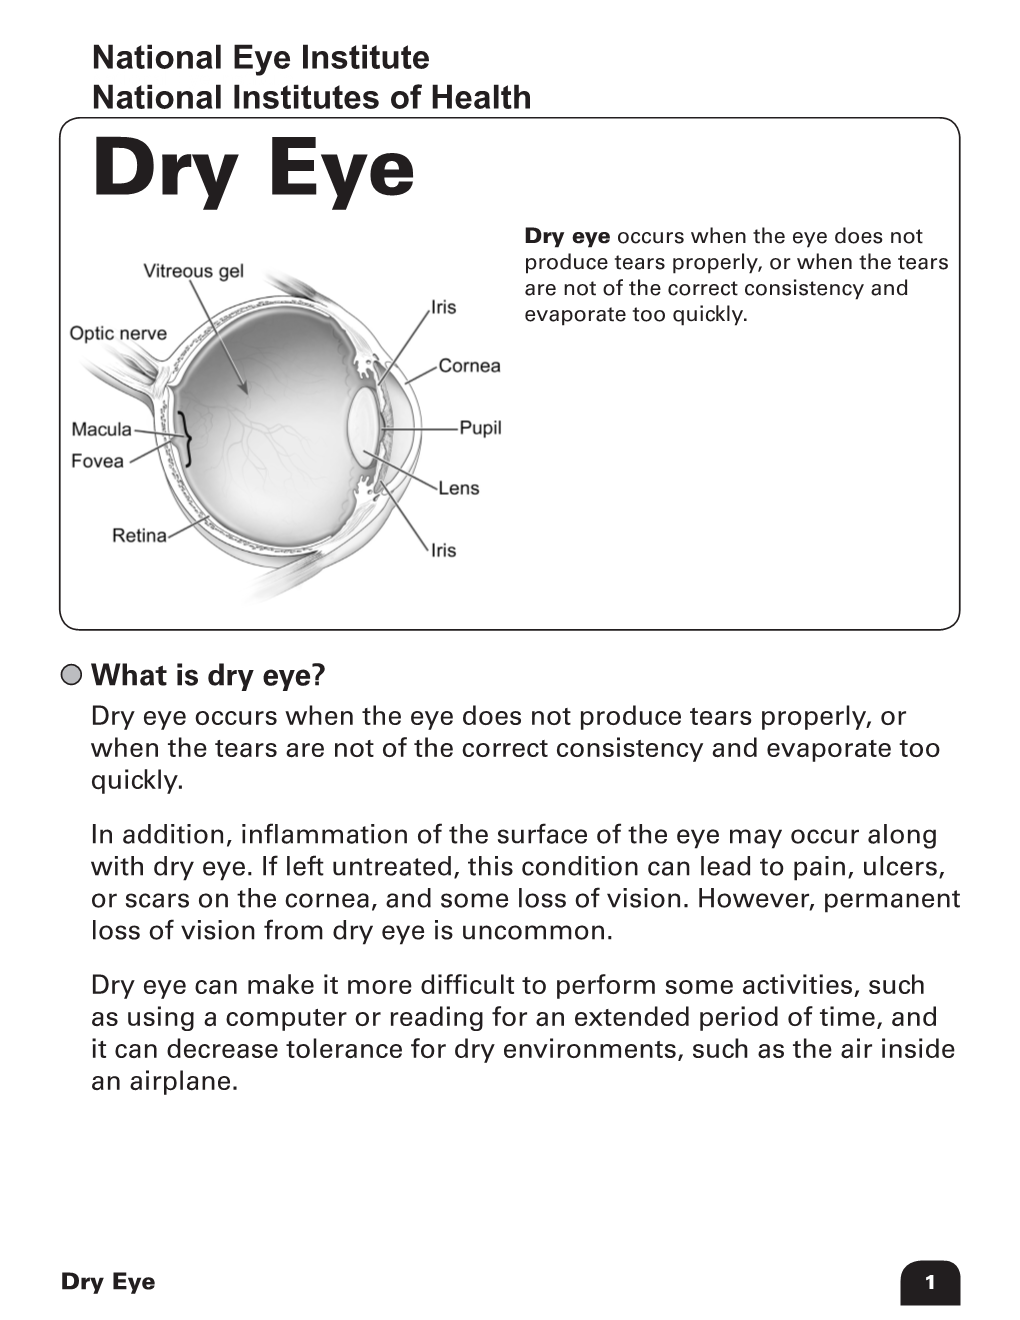 Dry Eye Dry Eye Occurs When the Eye Does Not Produce Tears Properly, Or When the Tears Are Not of the Correct Consistency and Evaporate Too Quickly